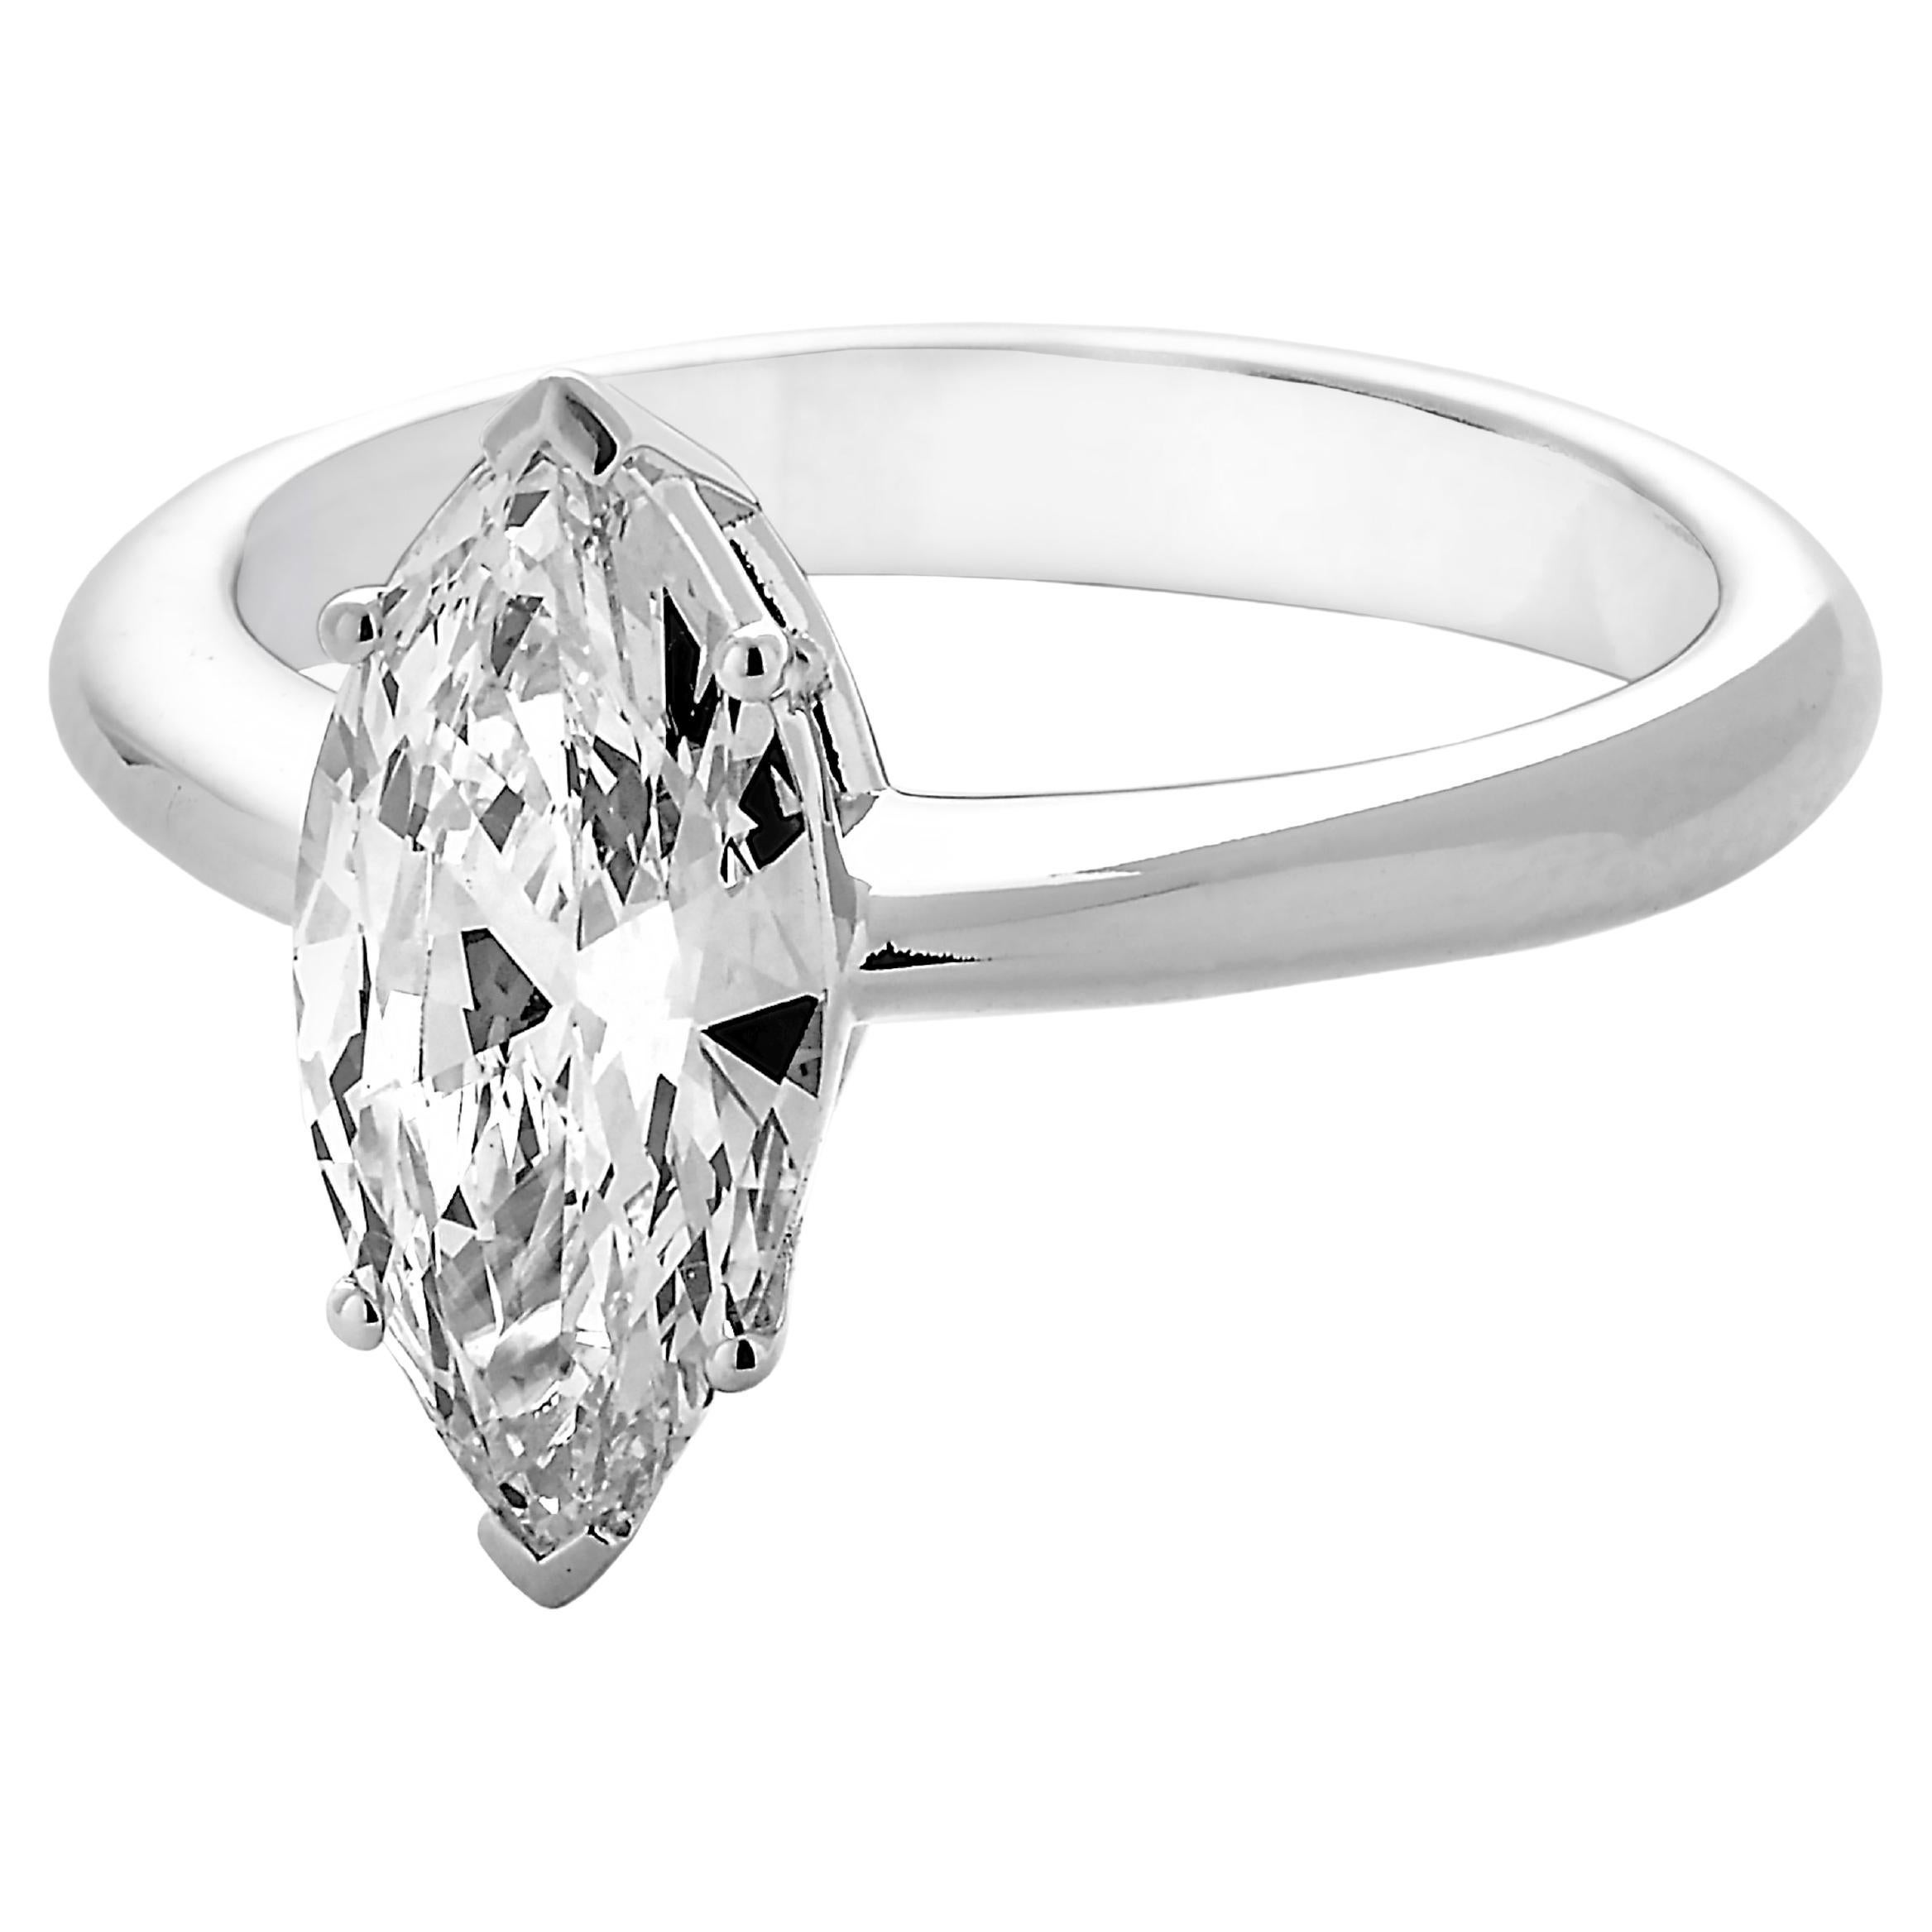 1.62 ct Marquise Shape IGI Solitaire Ring in 18k White Gold